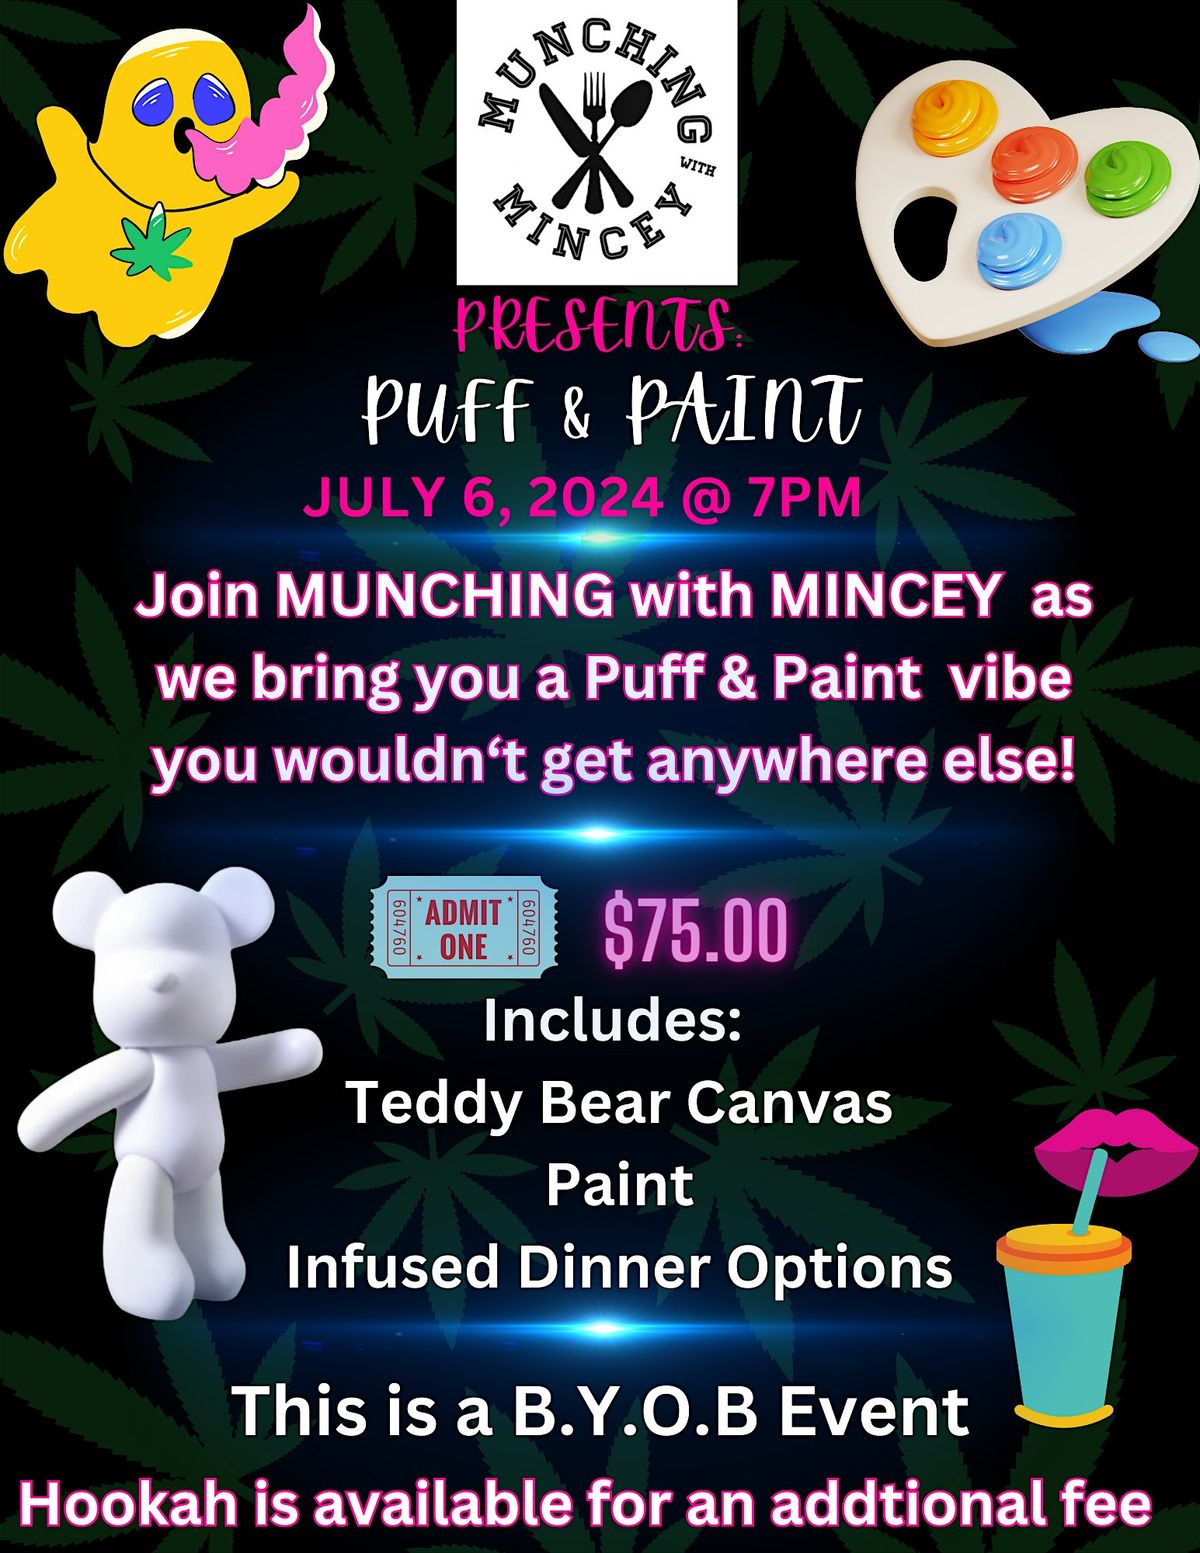 Munching with Mincey's Puff & Paint. July 6th @ 7pm